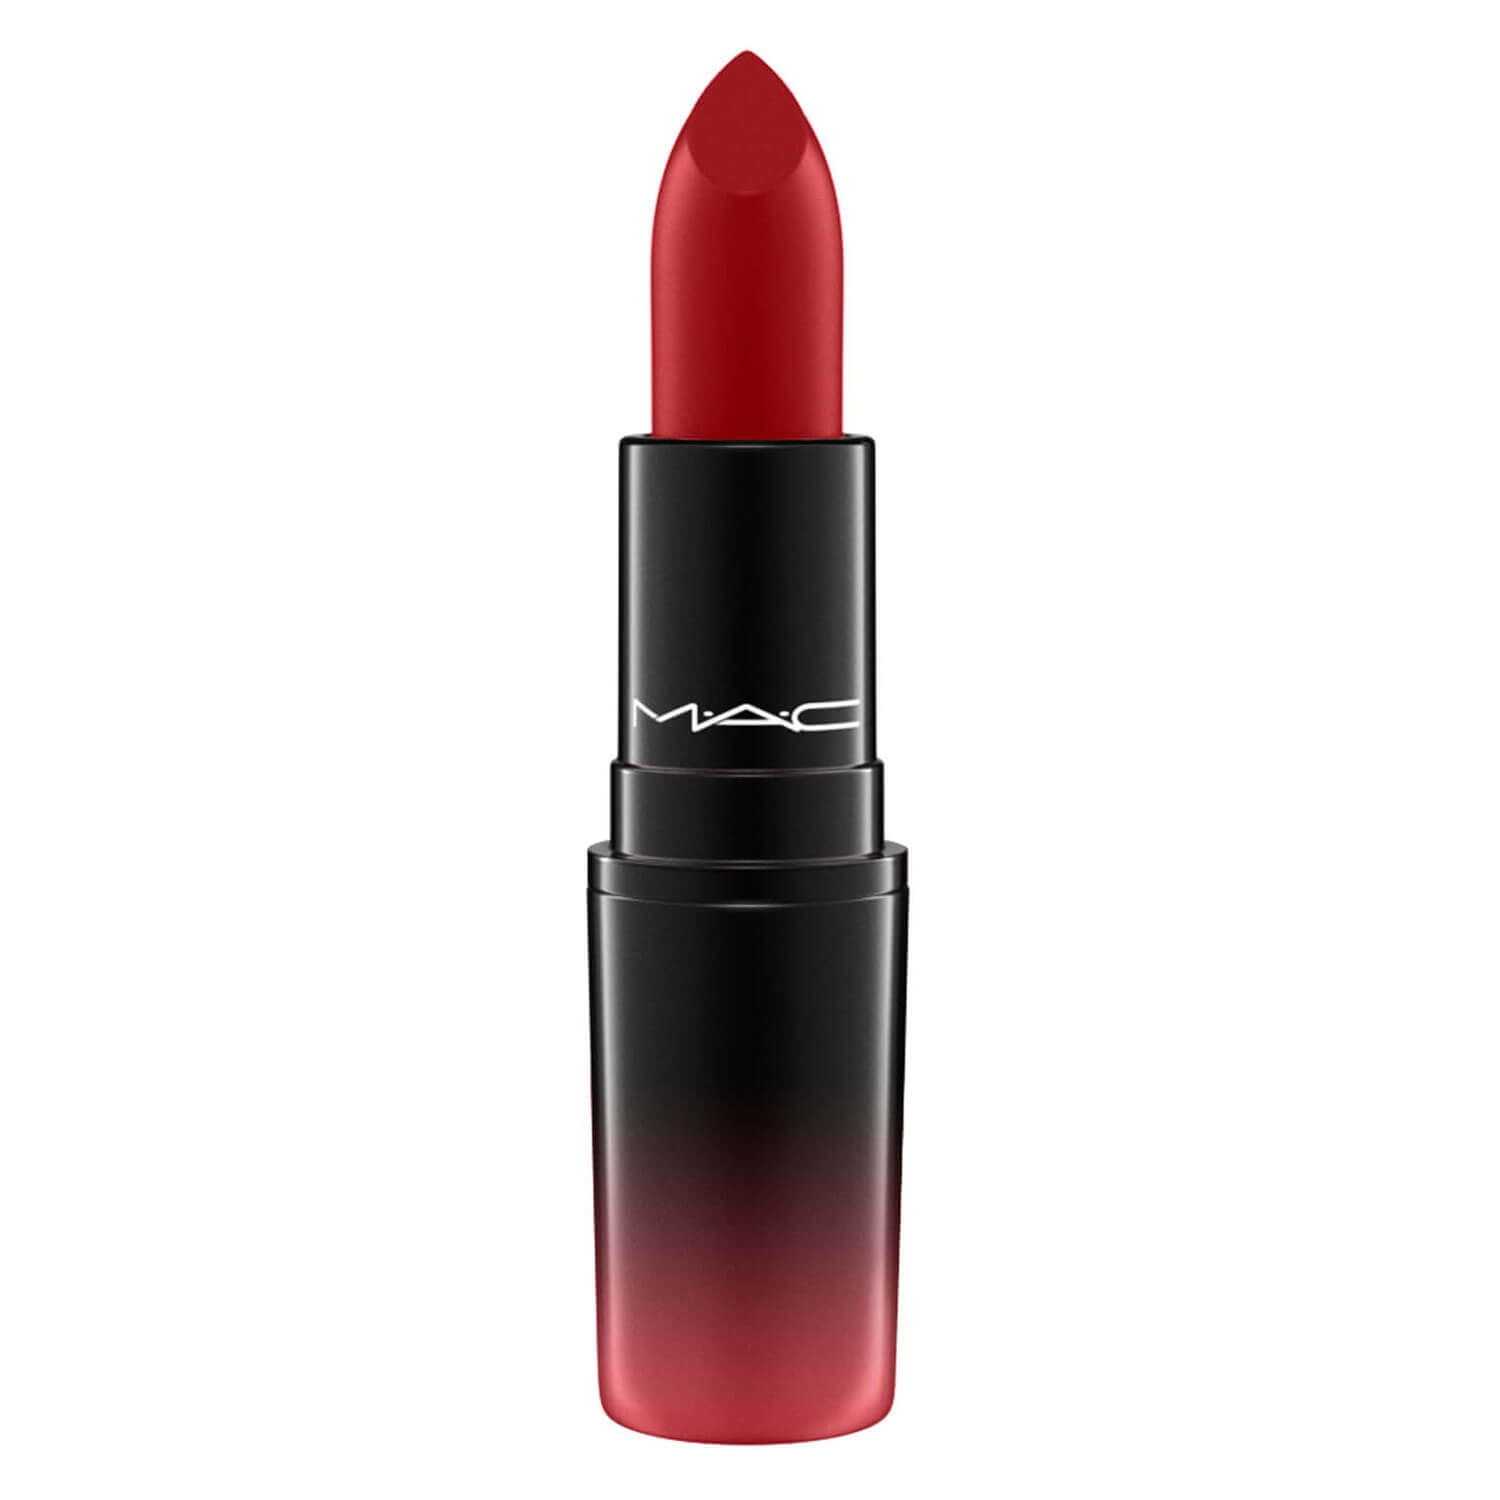 Product image from Love Me Lipstick - Maison Rouge